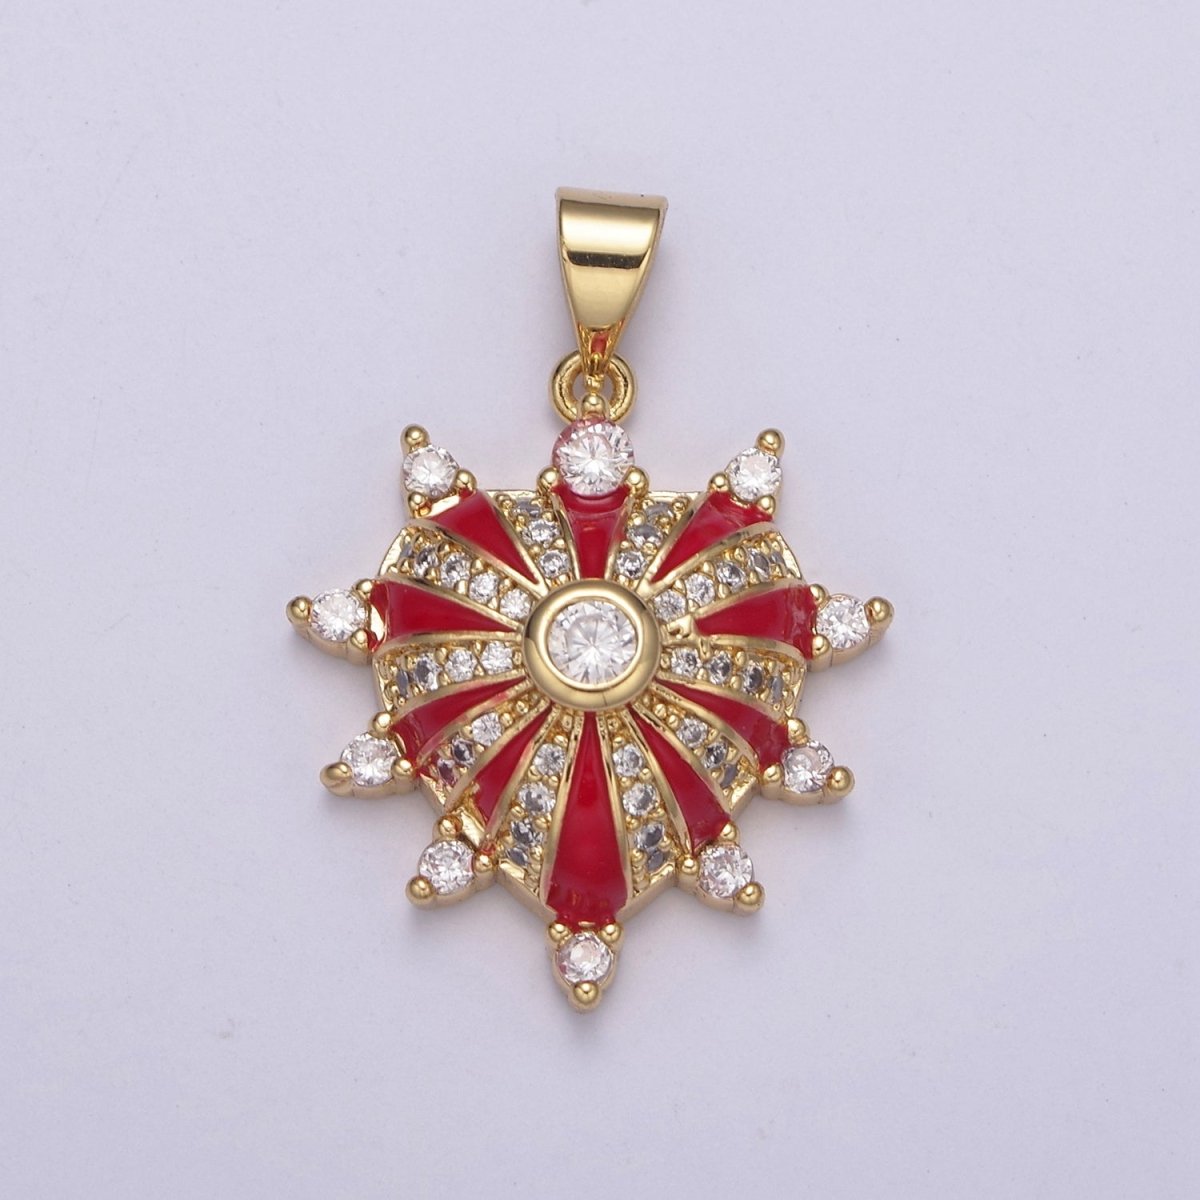 Dainty Gold Filled Heart Charm Enamel Love Medallion with Sunburst Radial Heart Pendant for Valentine Jewelry Making H-436 H439 H-440 H-441 - DLUXCA